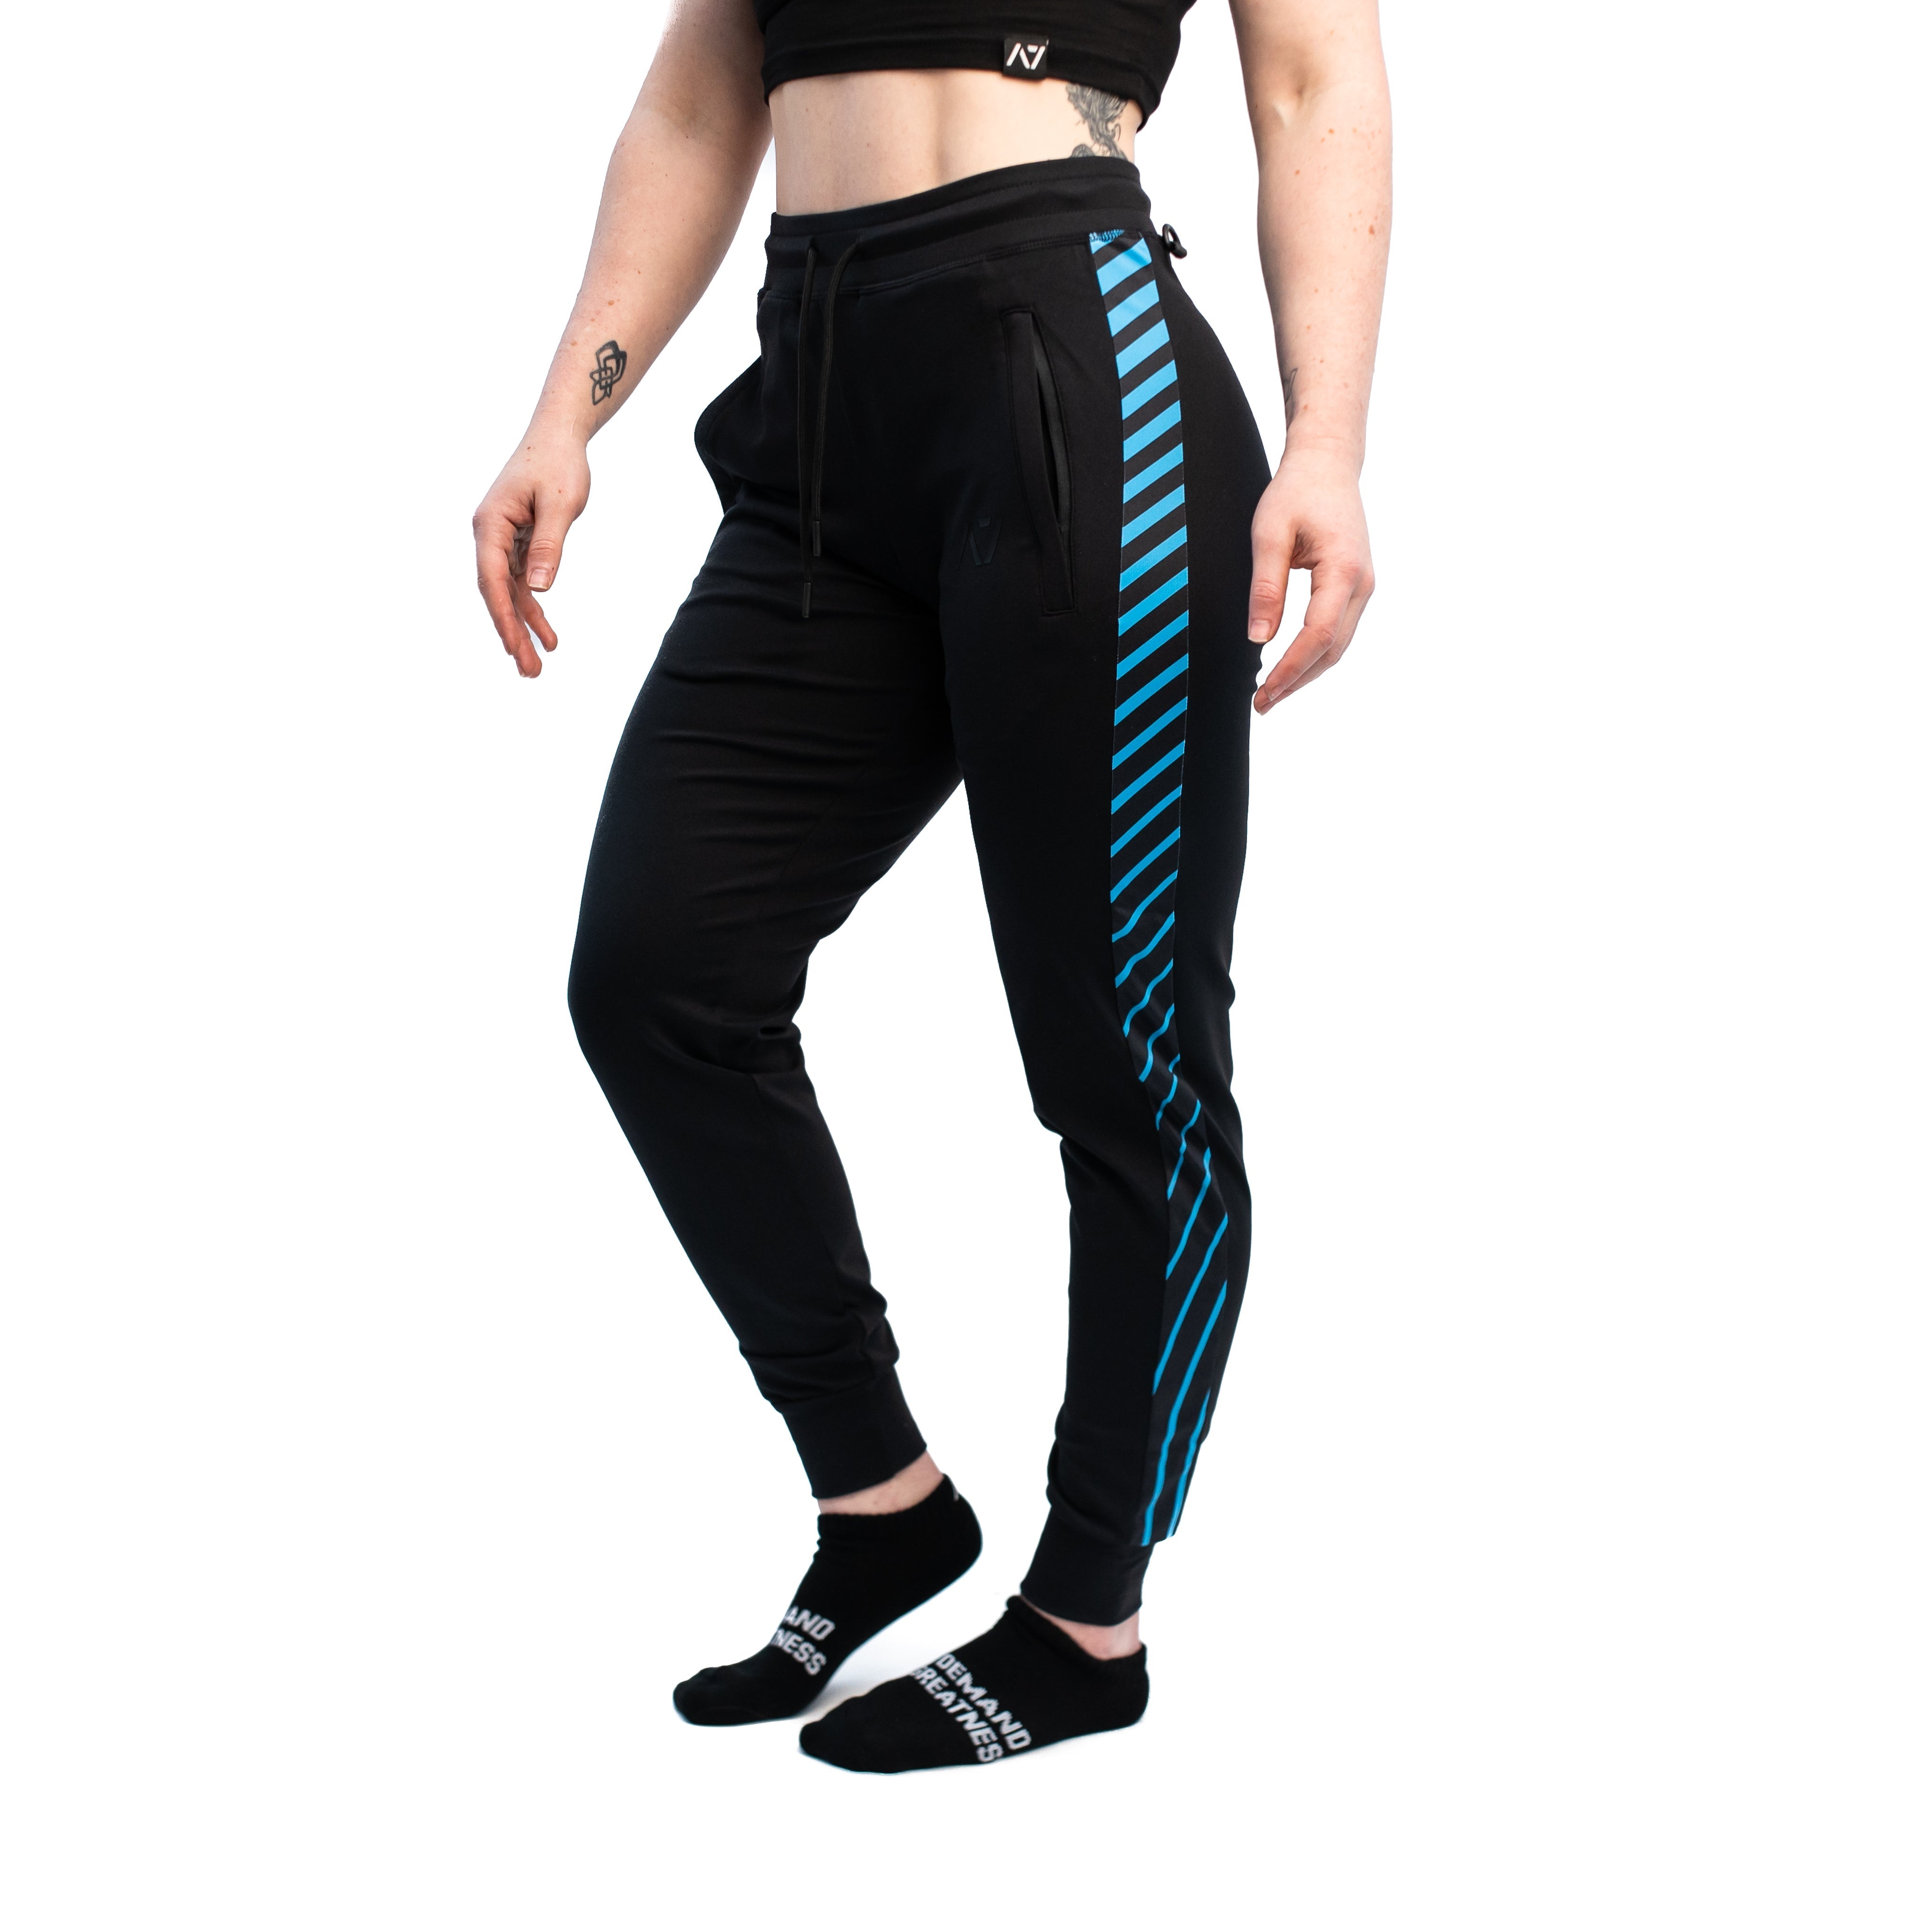 A7 Ripple Defy joggers are just as comfortable in the gym as they are going out. These are made with premium moisture-wicking 4-way-stretch material for greater range of motion. These are a great fit for both men and women and offer deep zippered pockets and tapered leg design. Purchase Ripple Defy Joggers from A7 UK shipping to UK or A7 Europe shipping to EU.